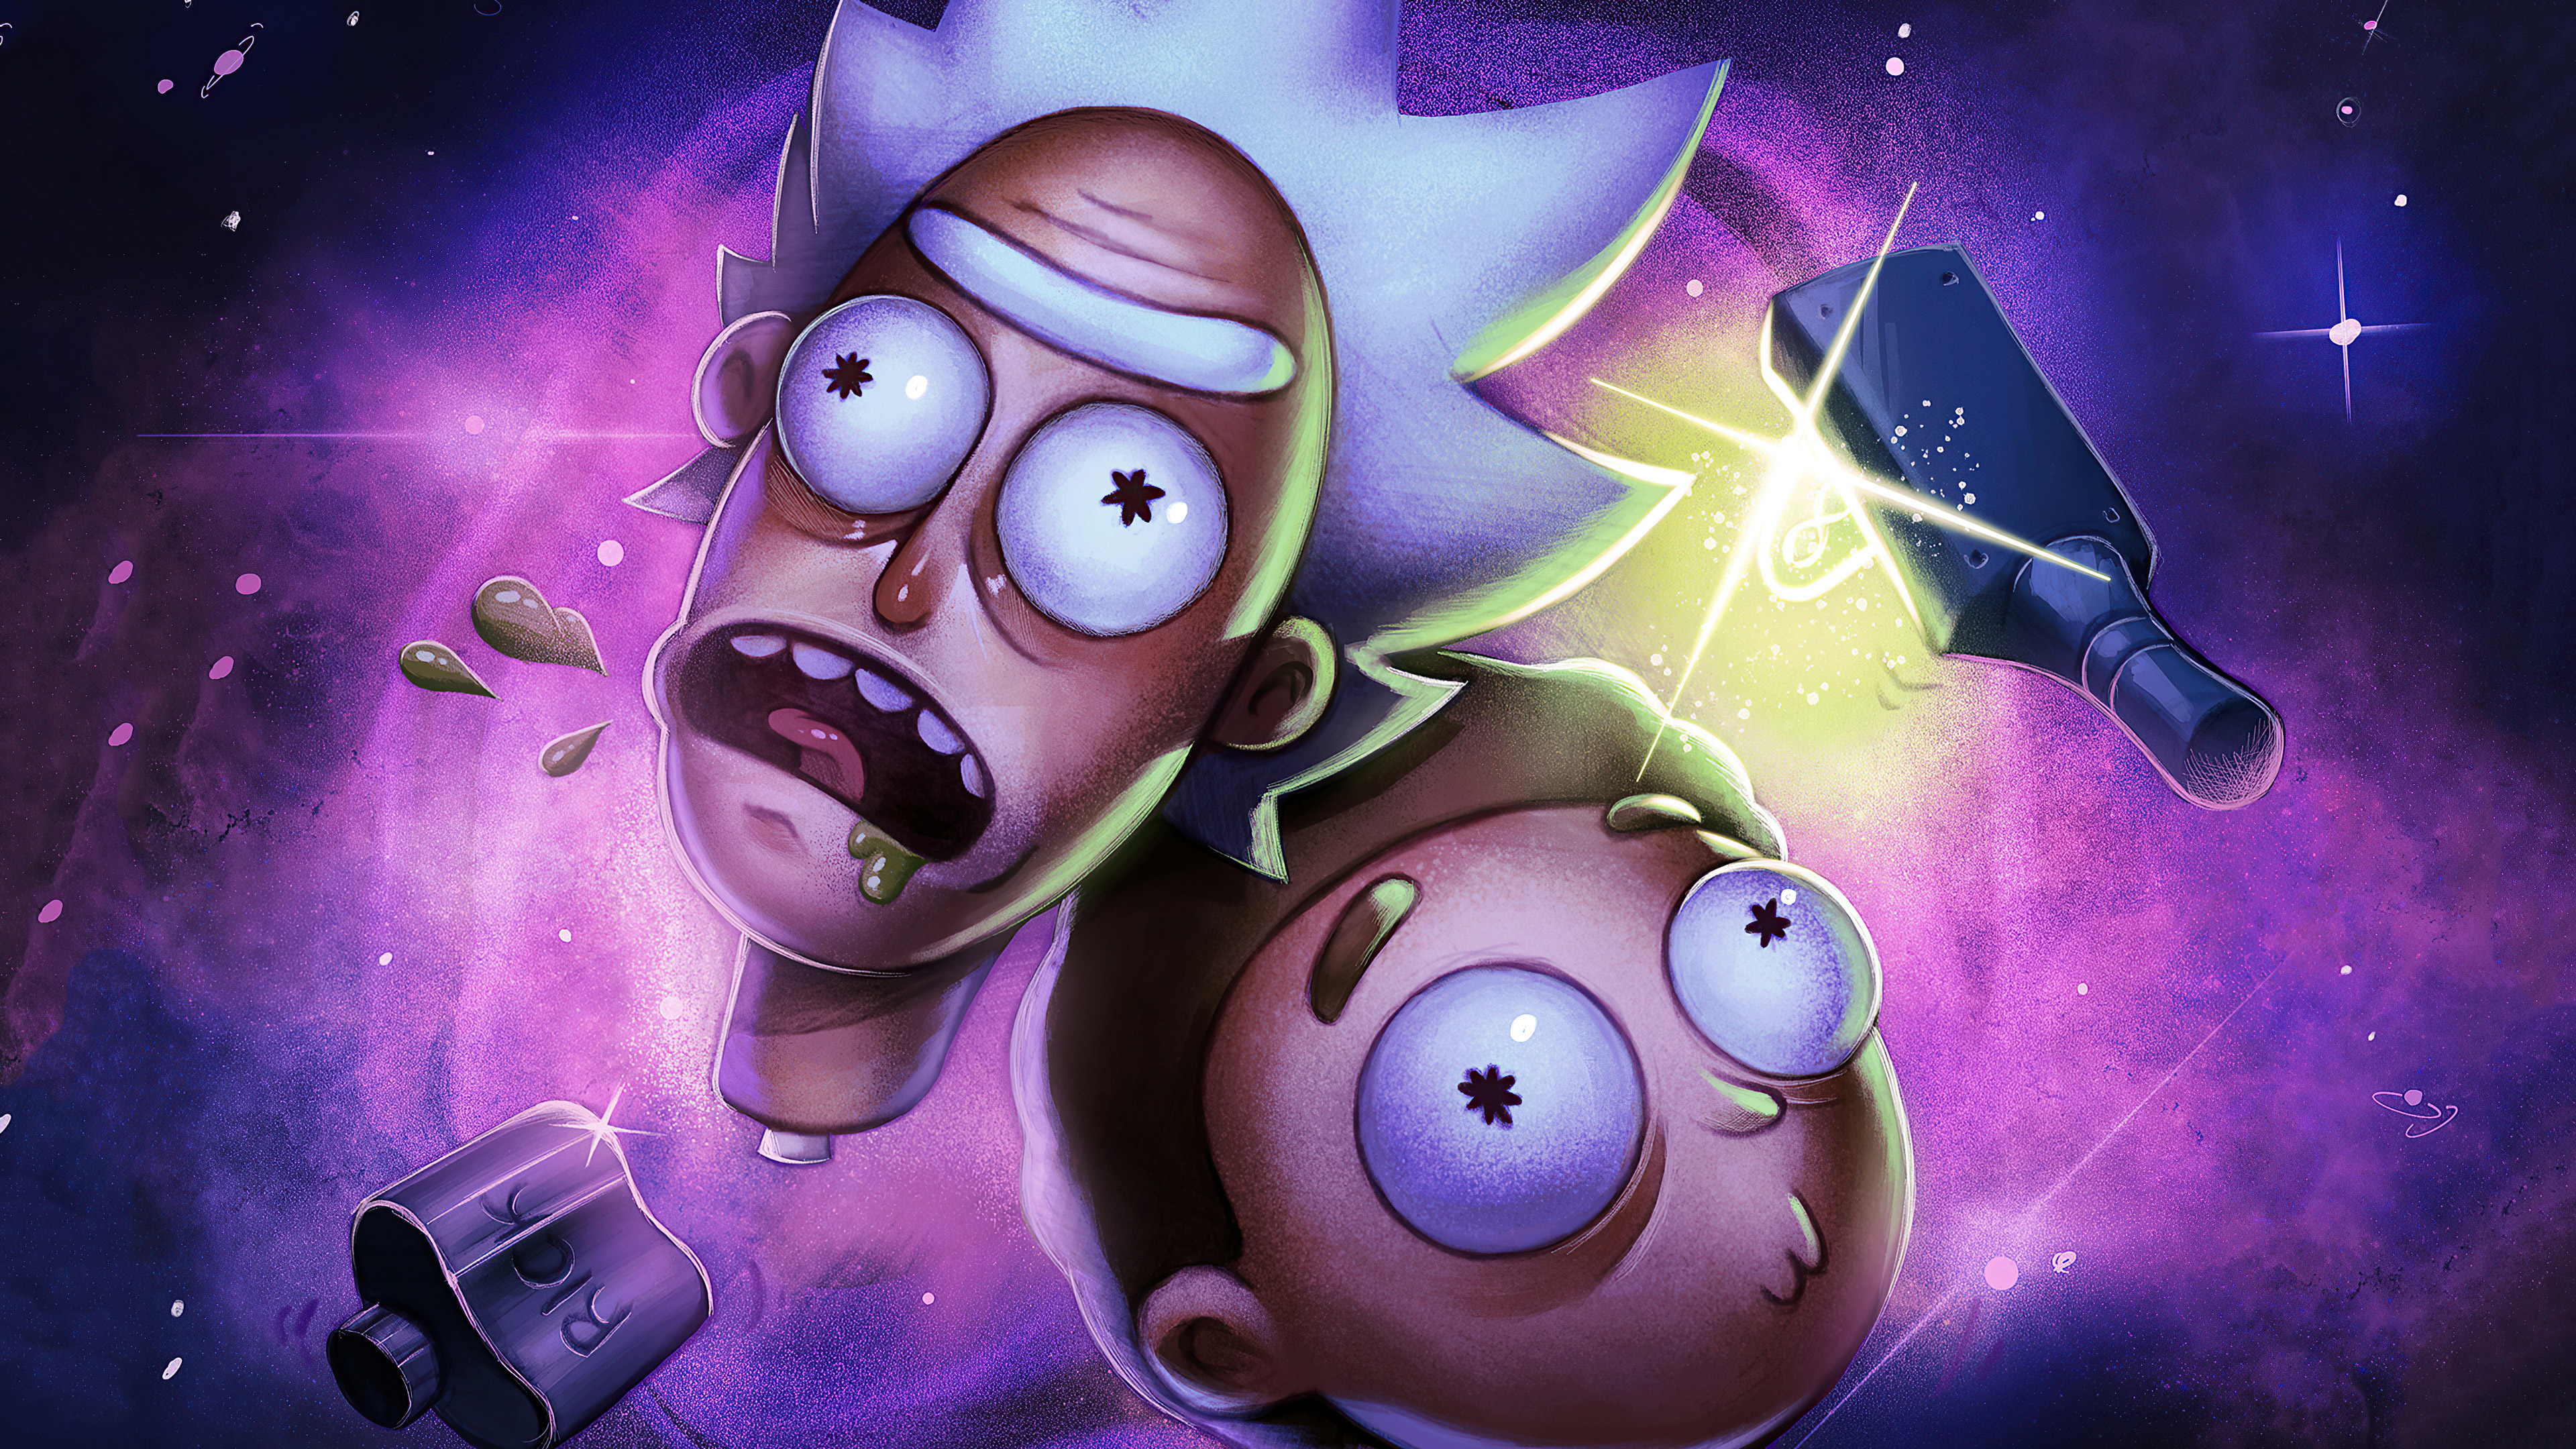 2048x1152 Morty Smith and Rick Sanchez FanArt 2048x1152 Resolution Wallpaper,  HD TV Series 4K Wallpapers, Images, Photos and Background - Wallpapers Den